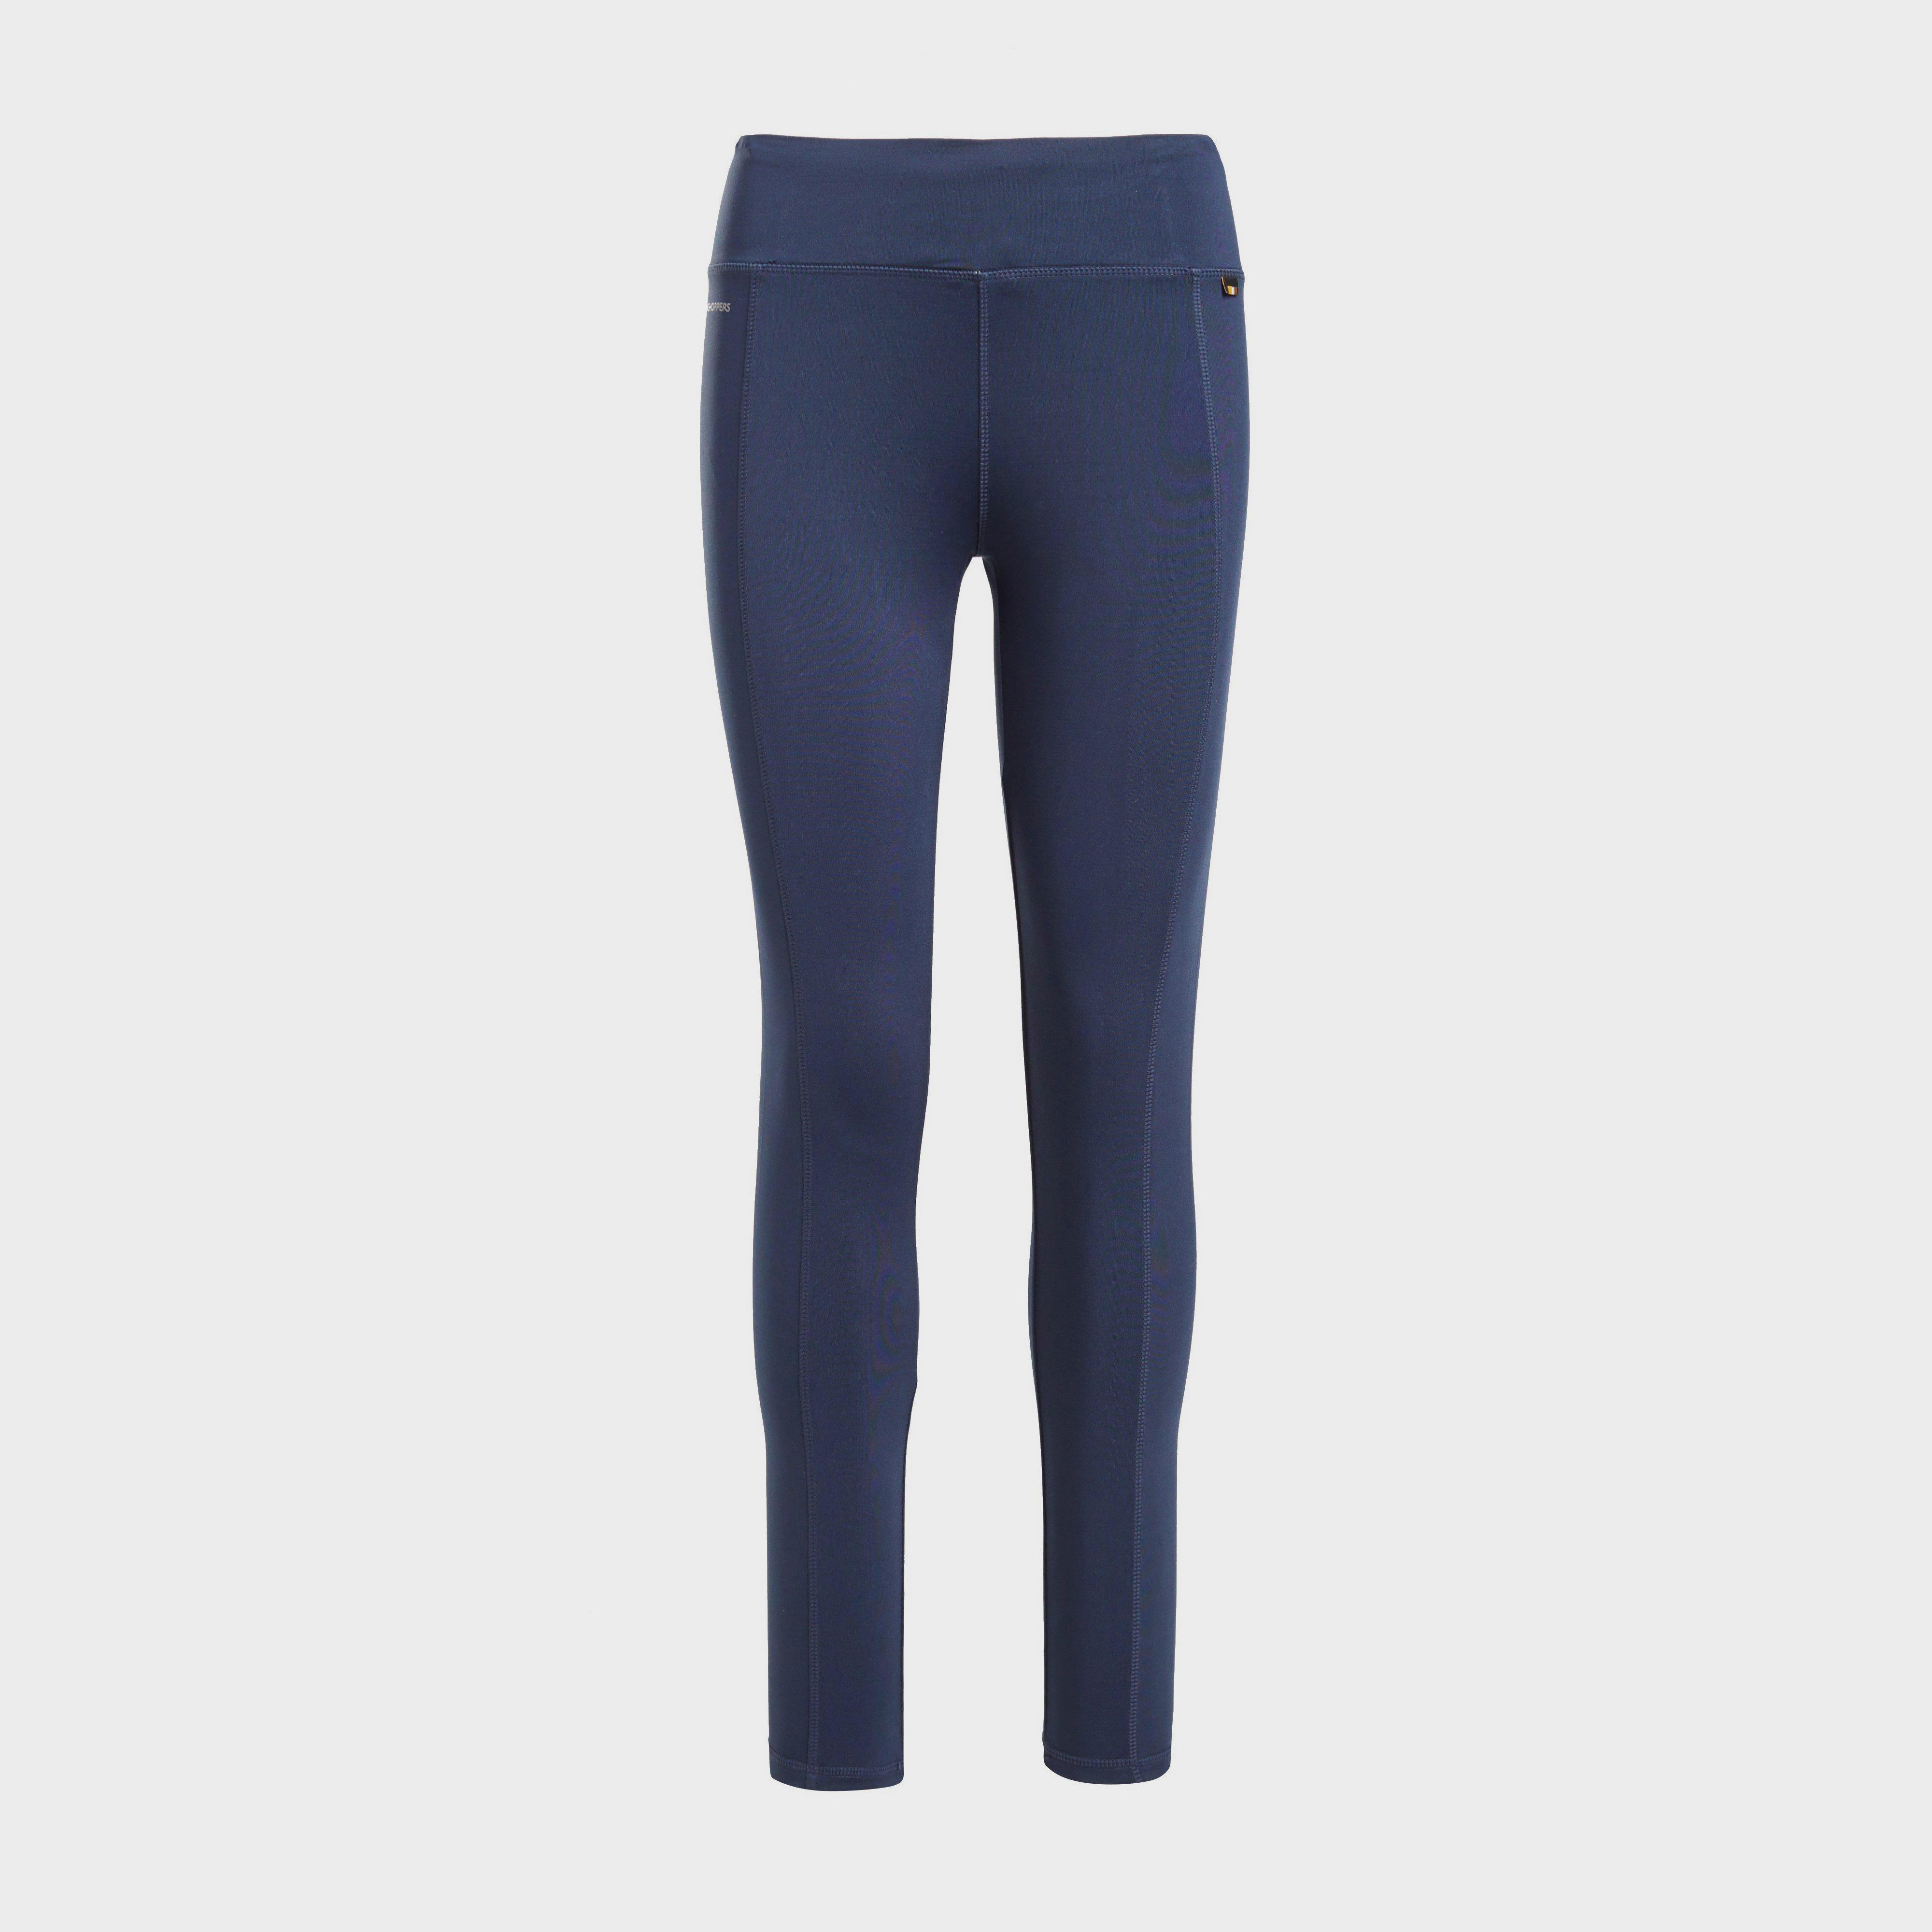 Craghoppers Womens Velocity Tights - Navy/nvy  Navy/nvy